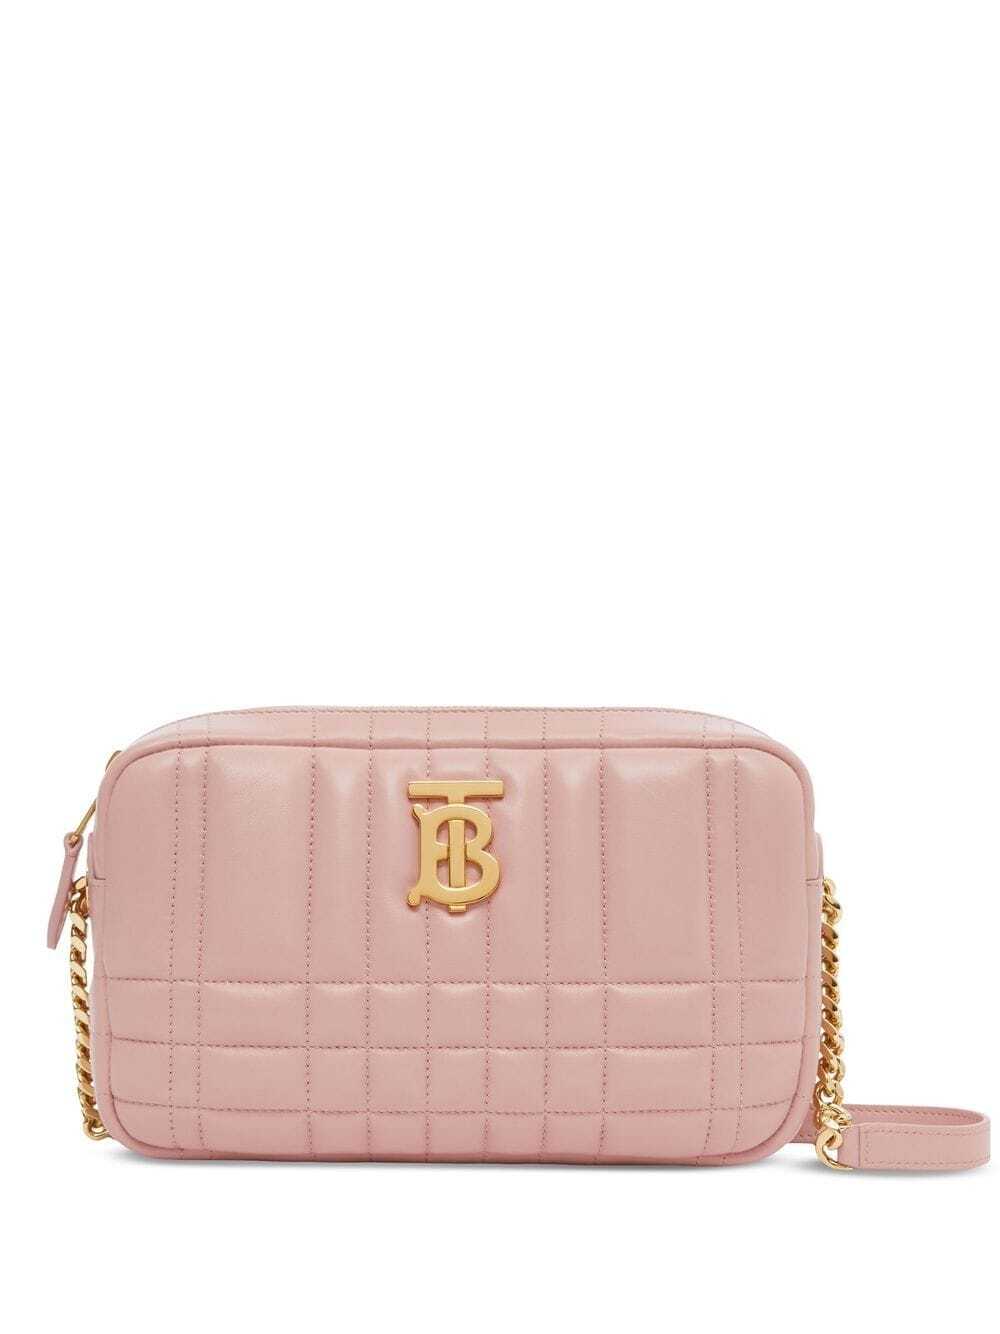 Burberry Lola quilted leather camera bag - Pink